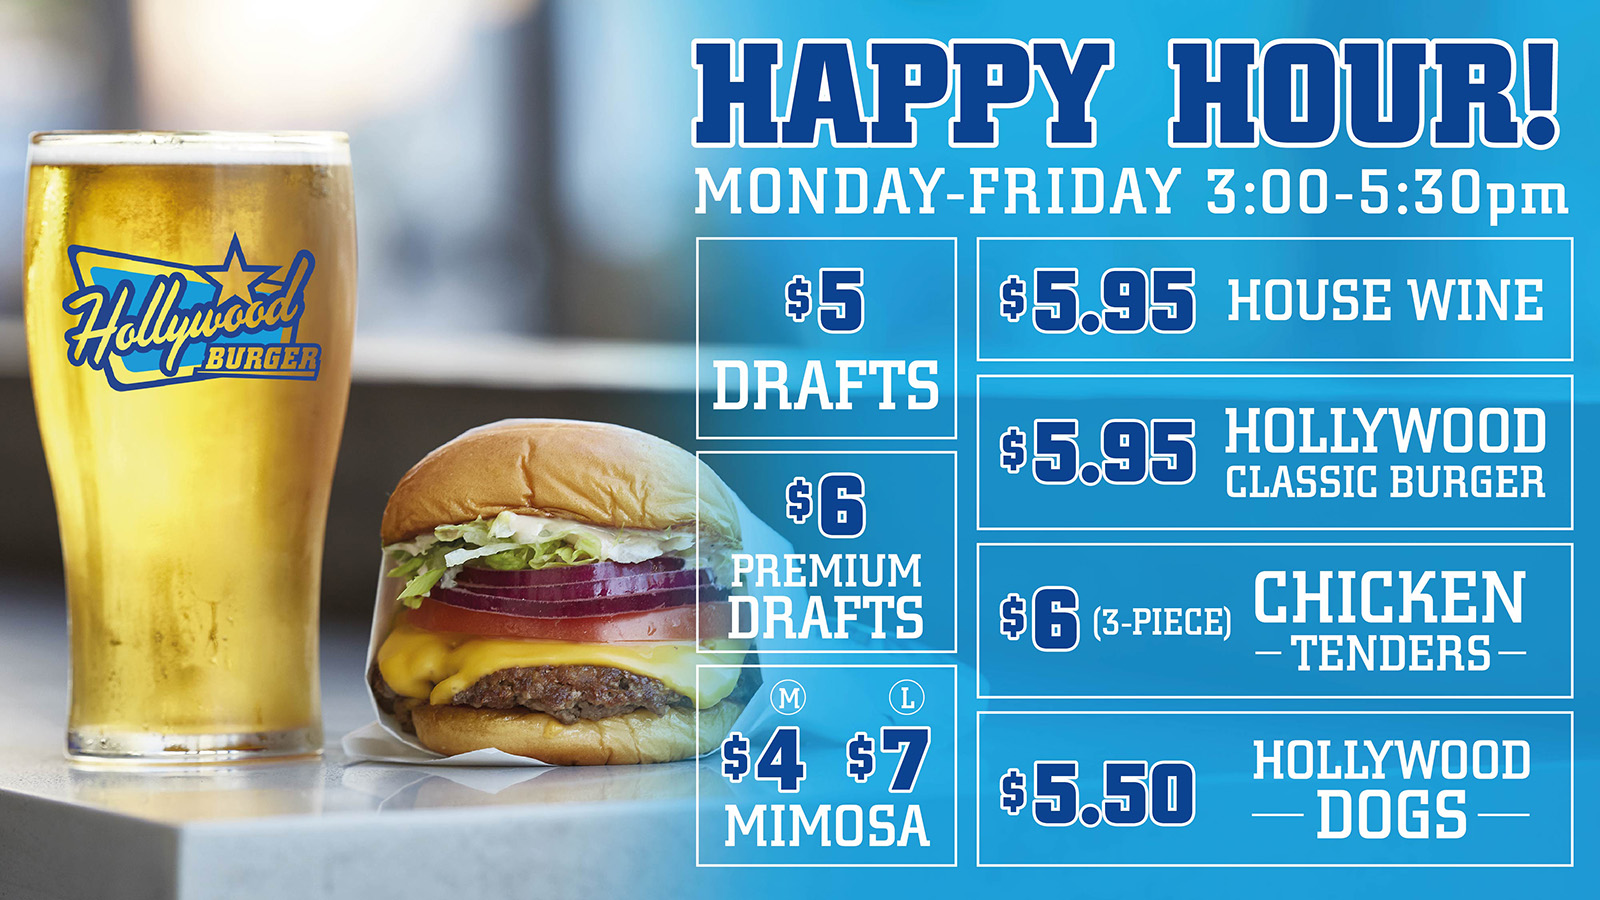 Happy Hour is Monday through Friday 3pm to 5:30 pm - get reduced prices on a selection of items!